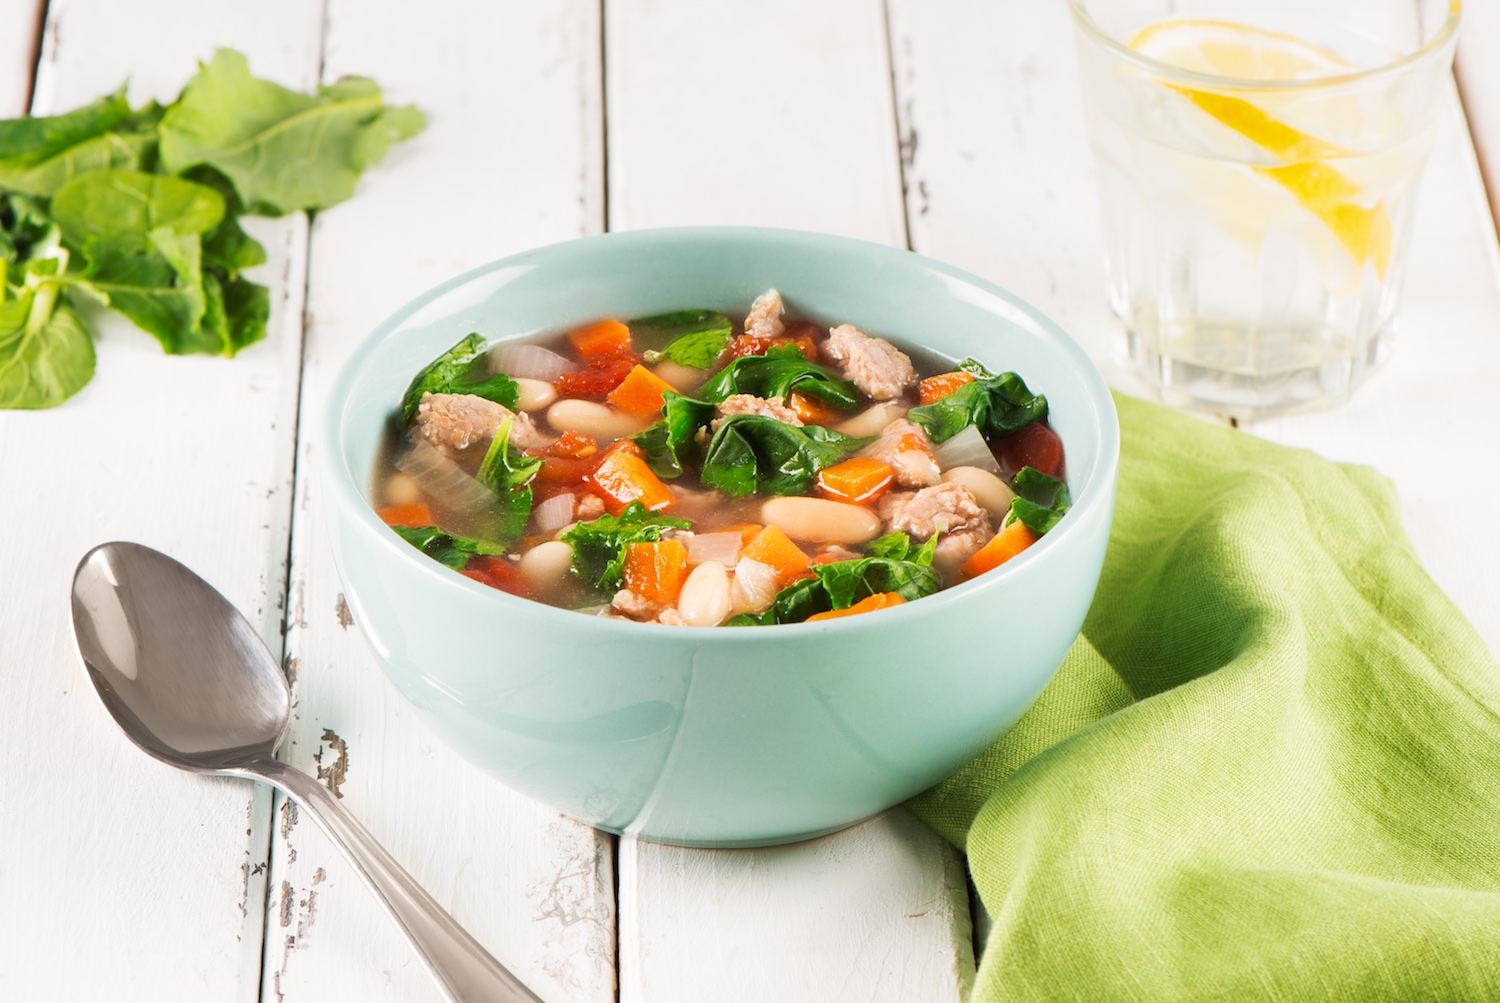 White bean and sausage soup with greens